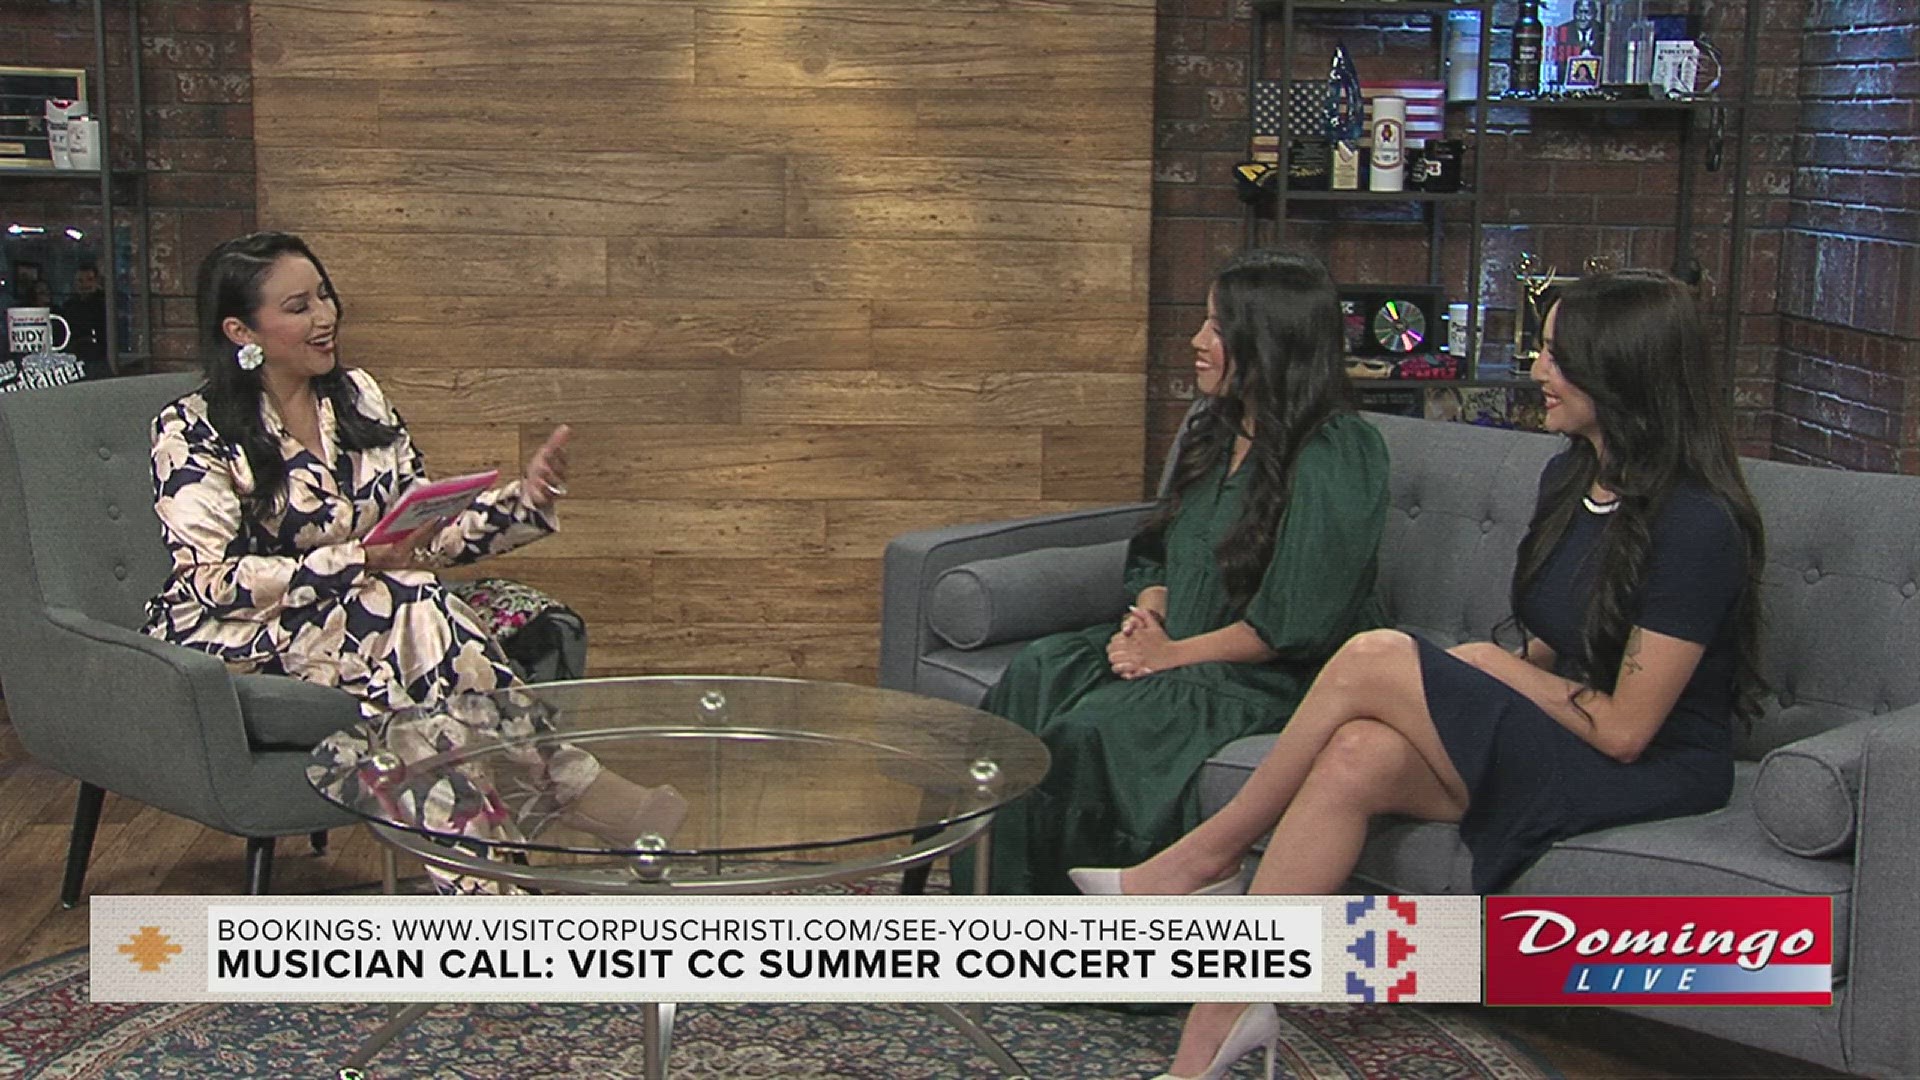 Visit Corpus Christi and the CC Music Commission joined us on Domingo Live to invite the public to celebrate area sports and live music this summer.